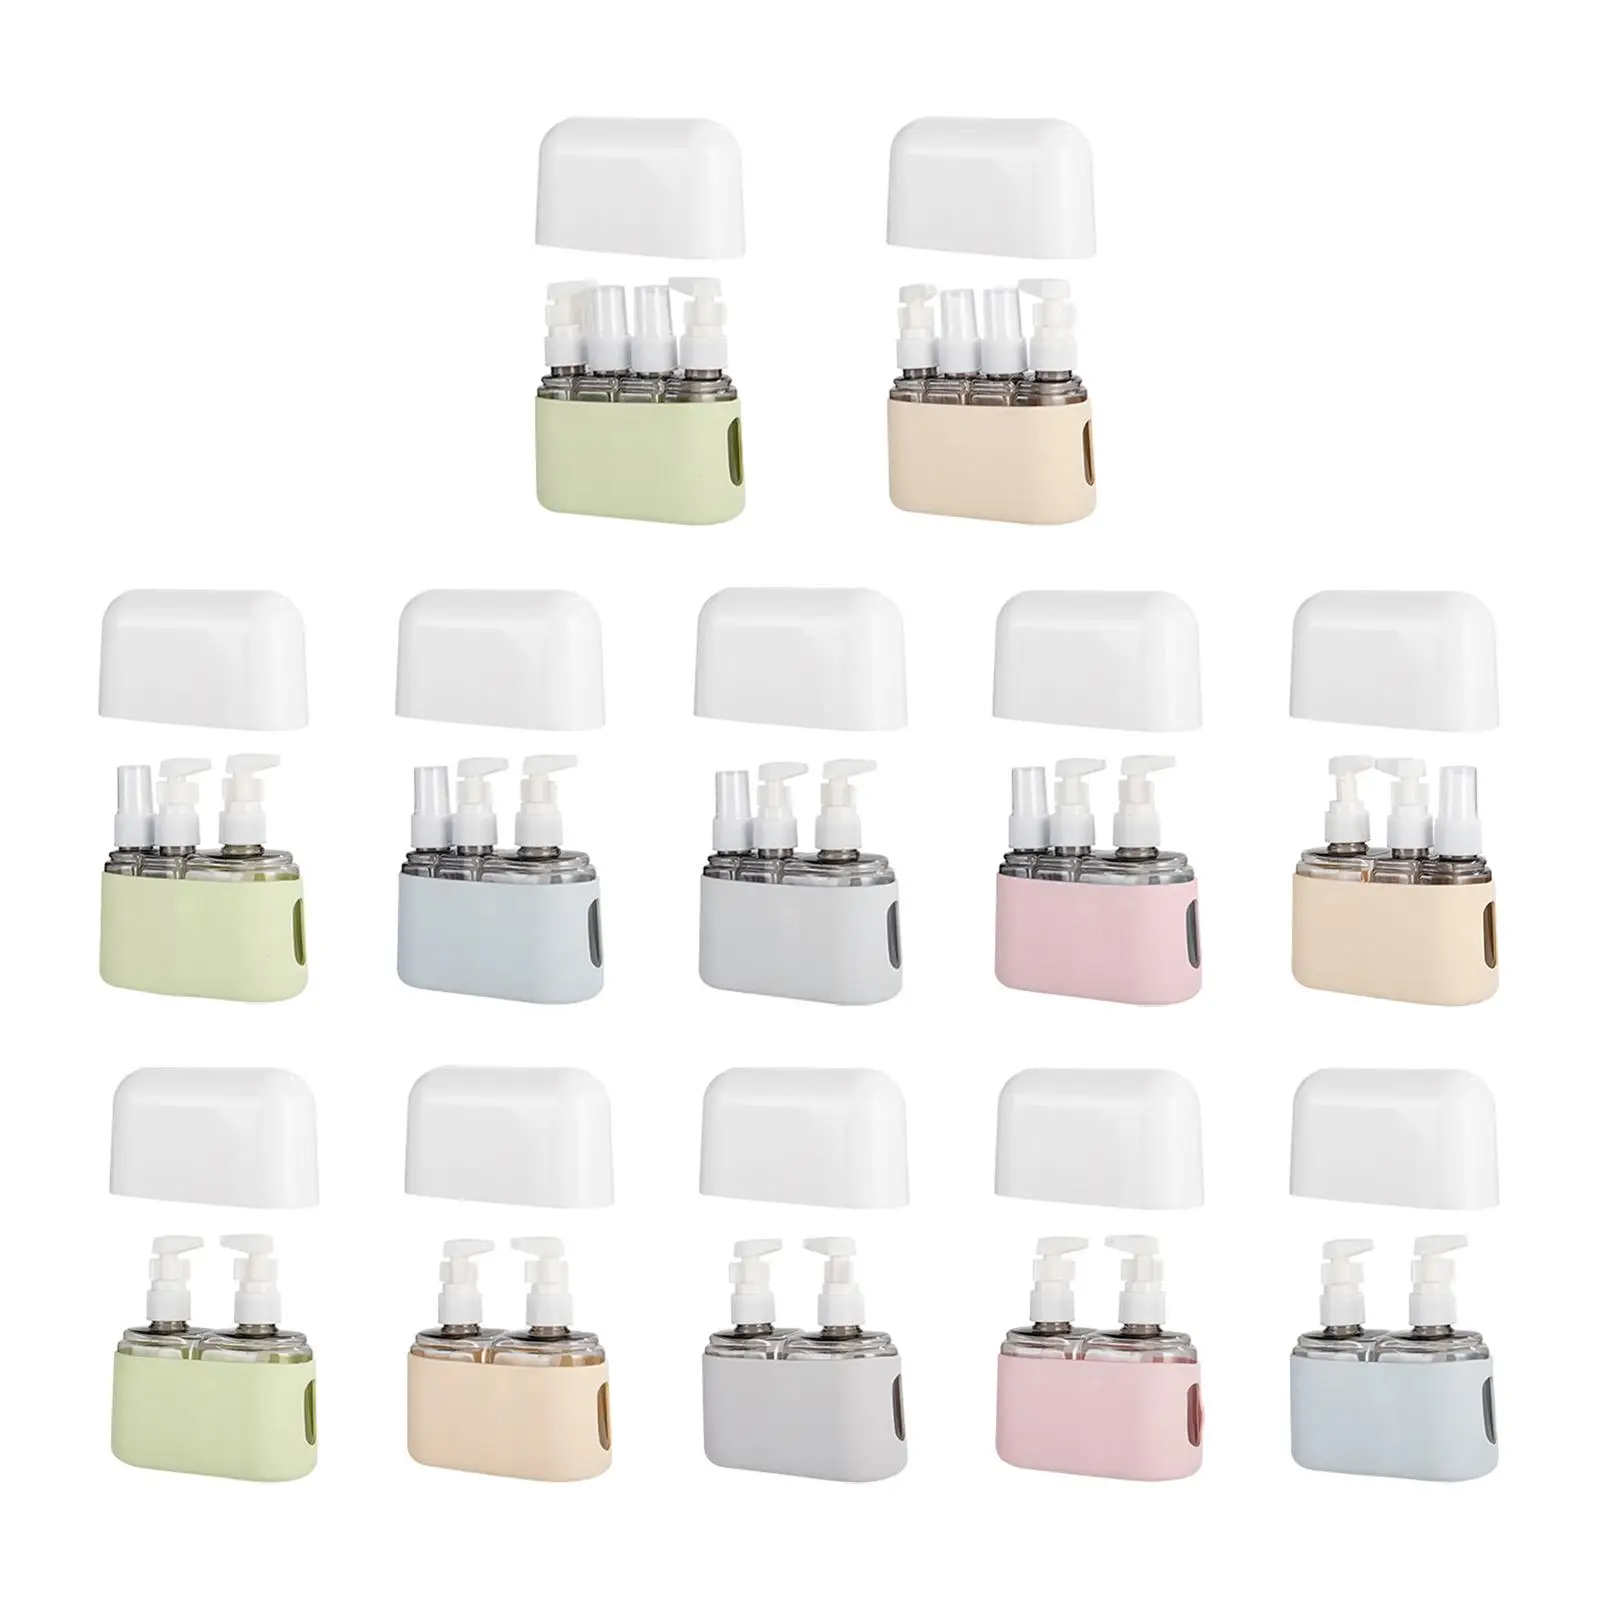 travel bottles for toiletries leakproof compact size airplane accessories for body wash perfumes cosmetics foam soap conditioner Travel Bottles for Toiletries Leakproof Compact Size Airplane Accessories for Body Wash Perfumes Cosmetics Foam Soap Conditioner